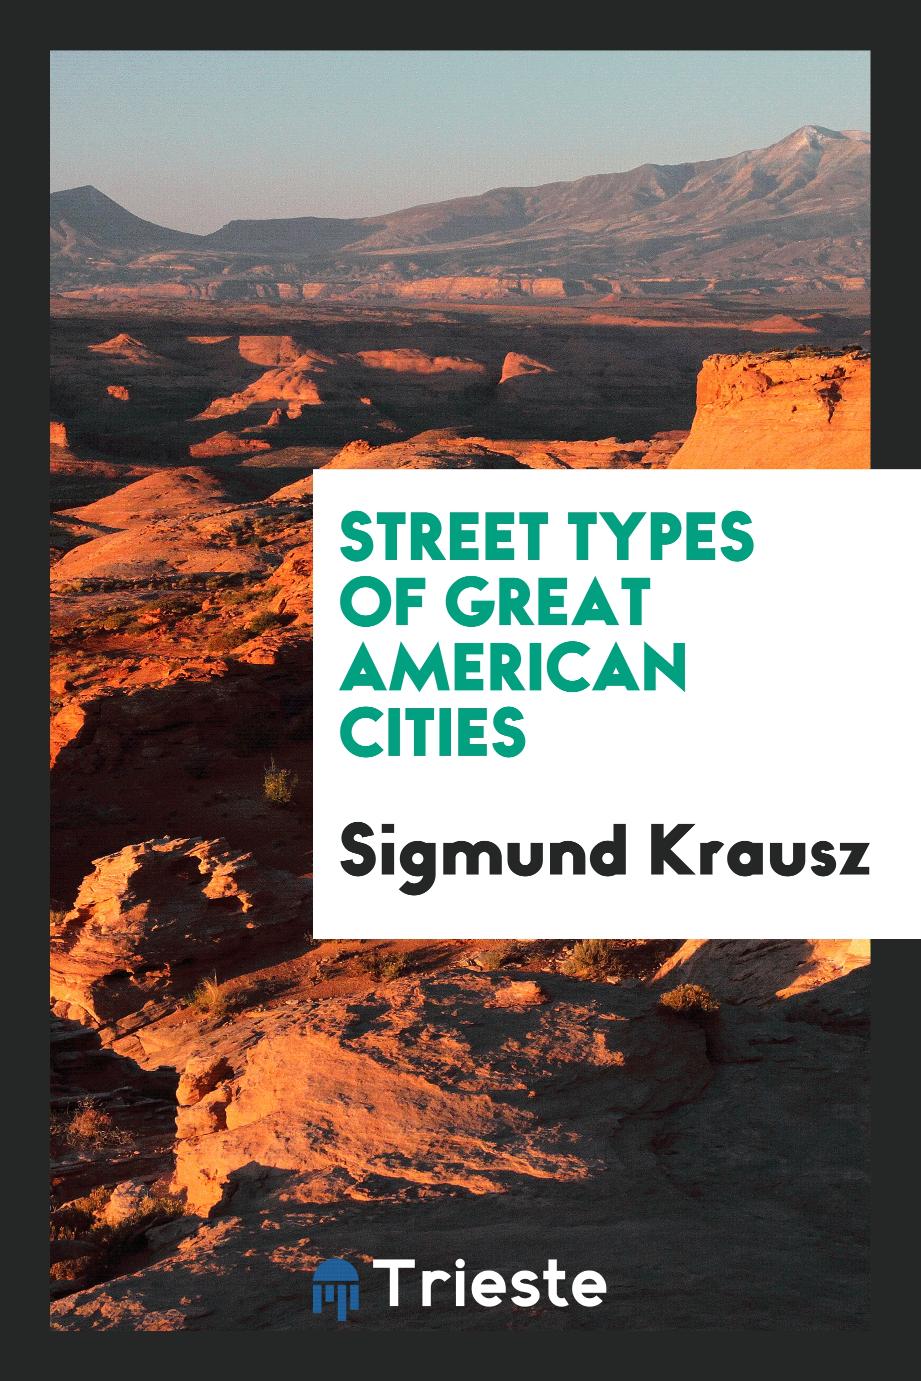 Street types of great American cities